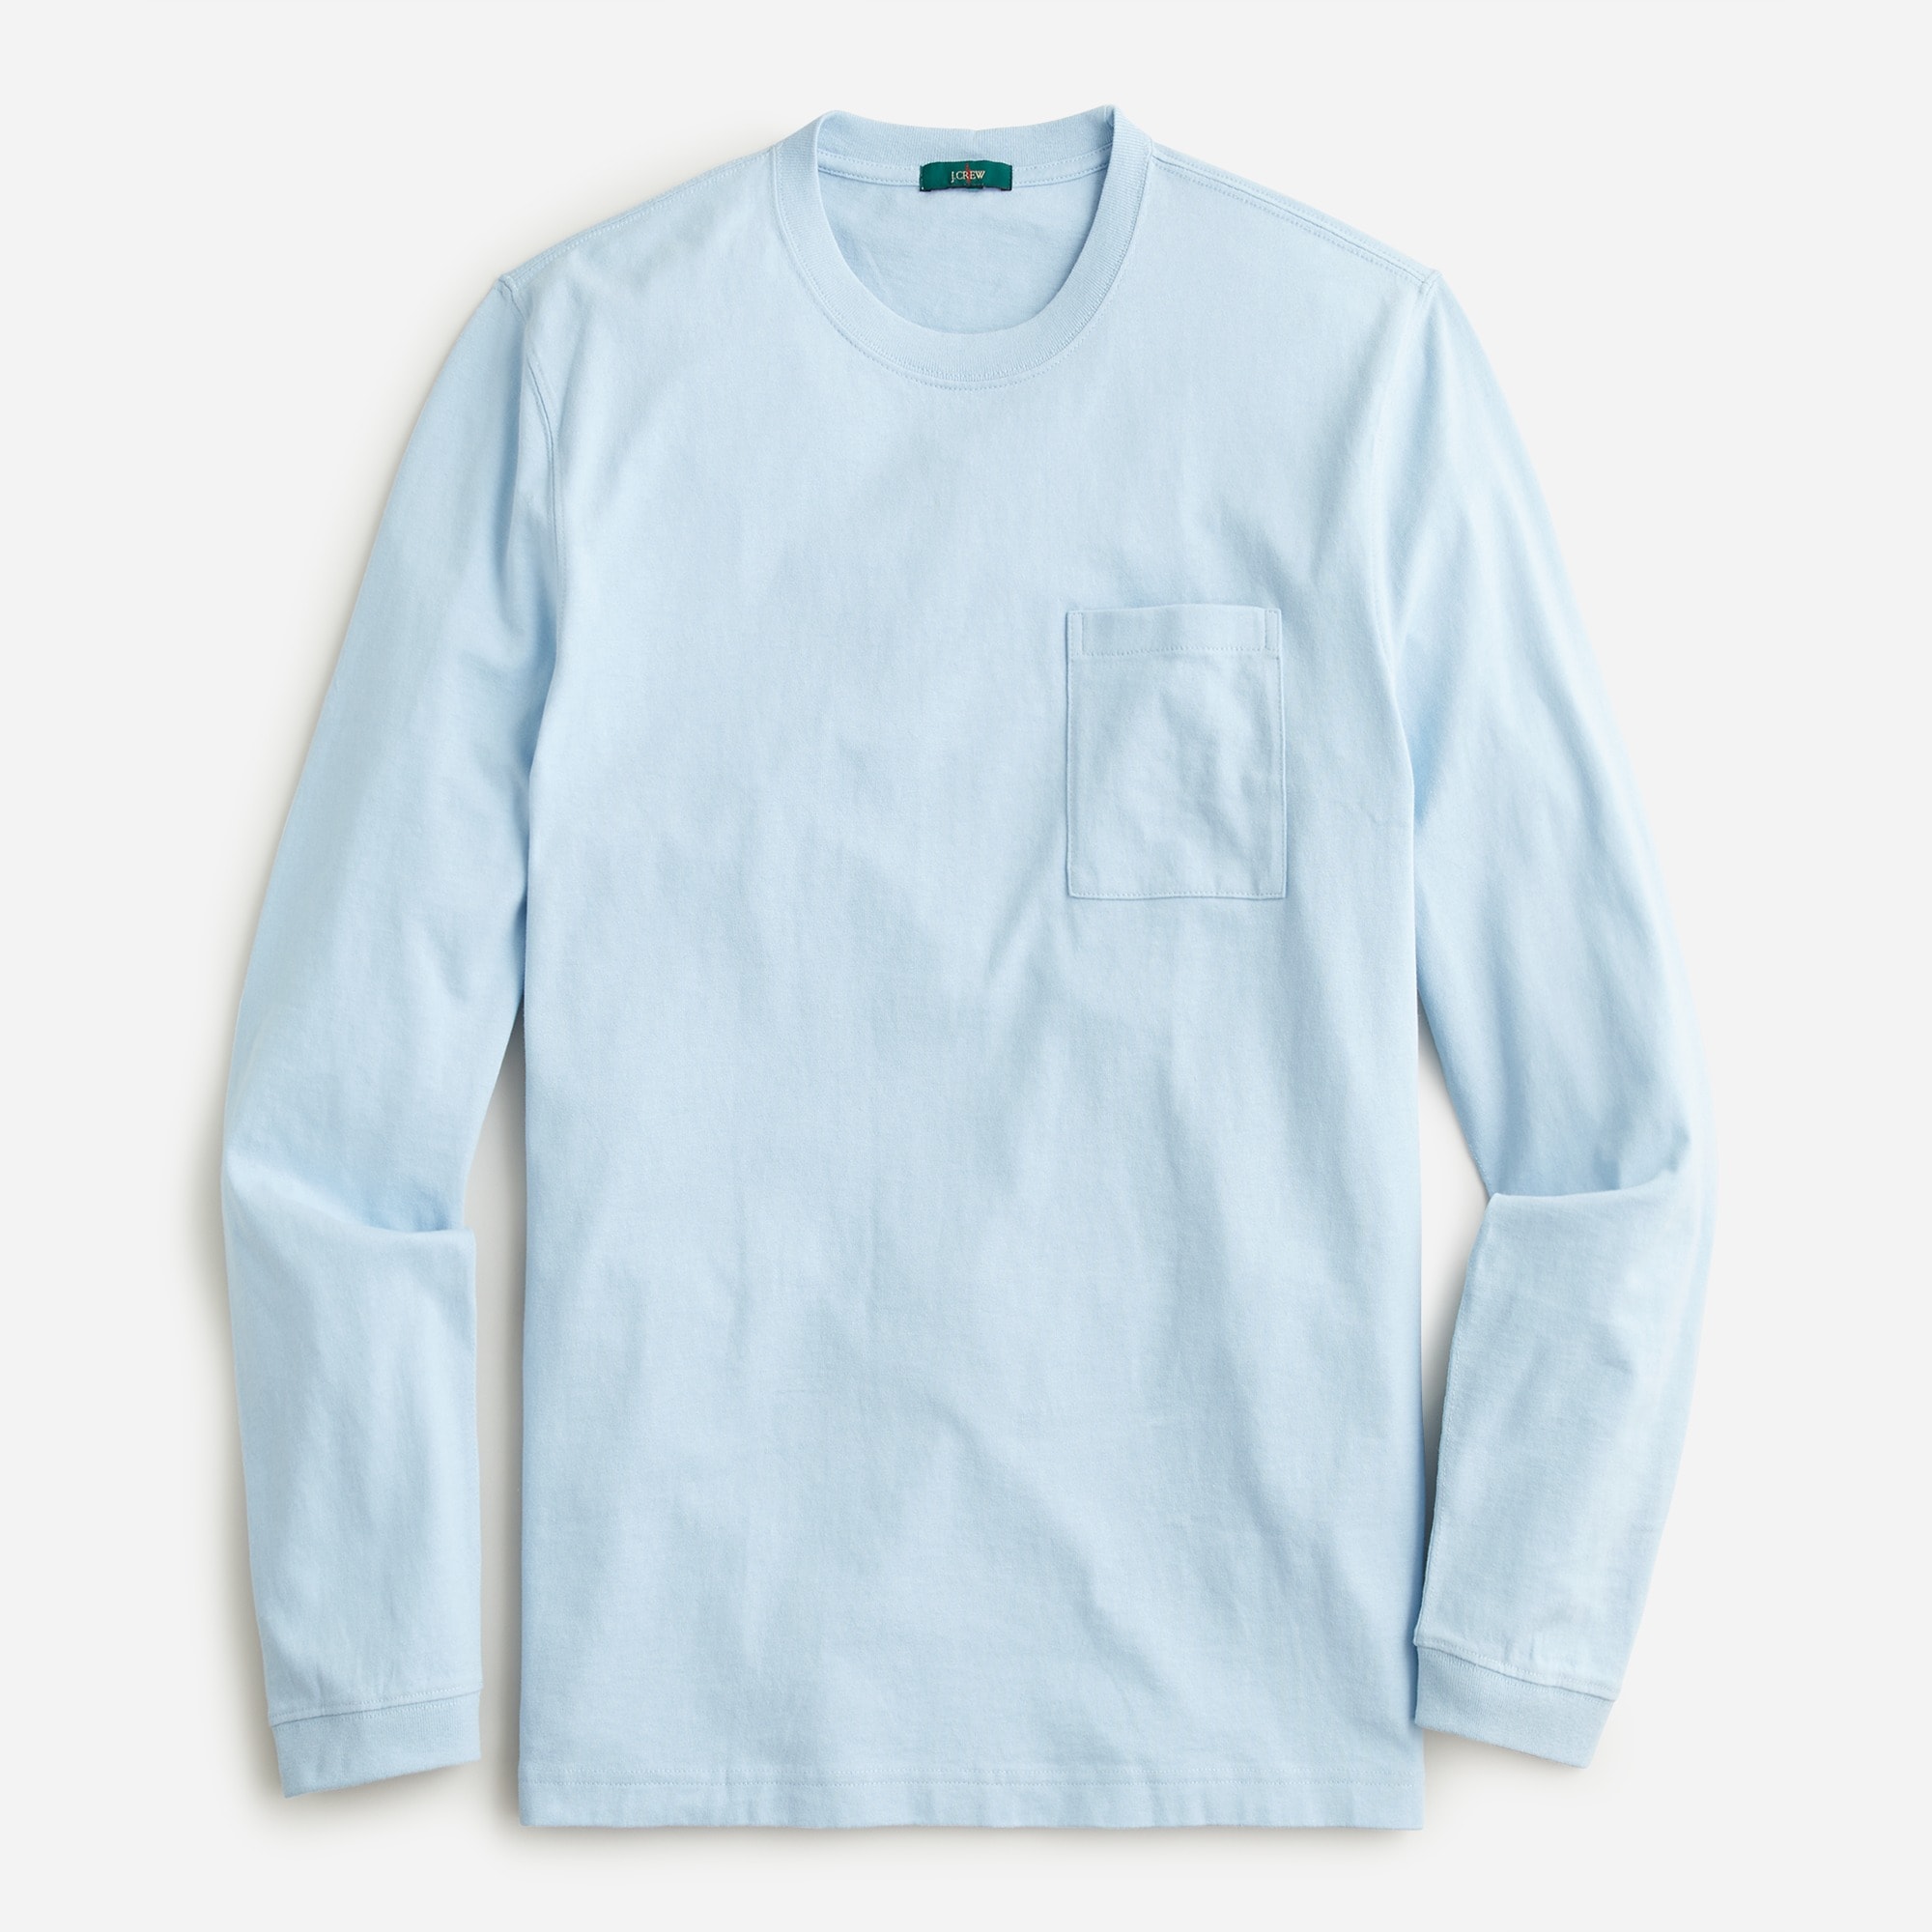 J.Crew: Relaxed Long-sleeve Premium-weight Cotton Pocket T-shirt For Men